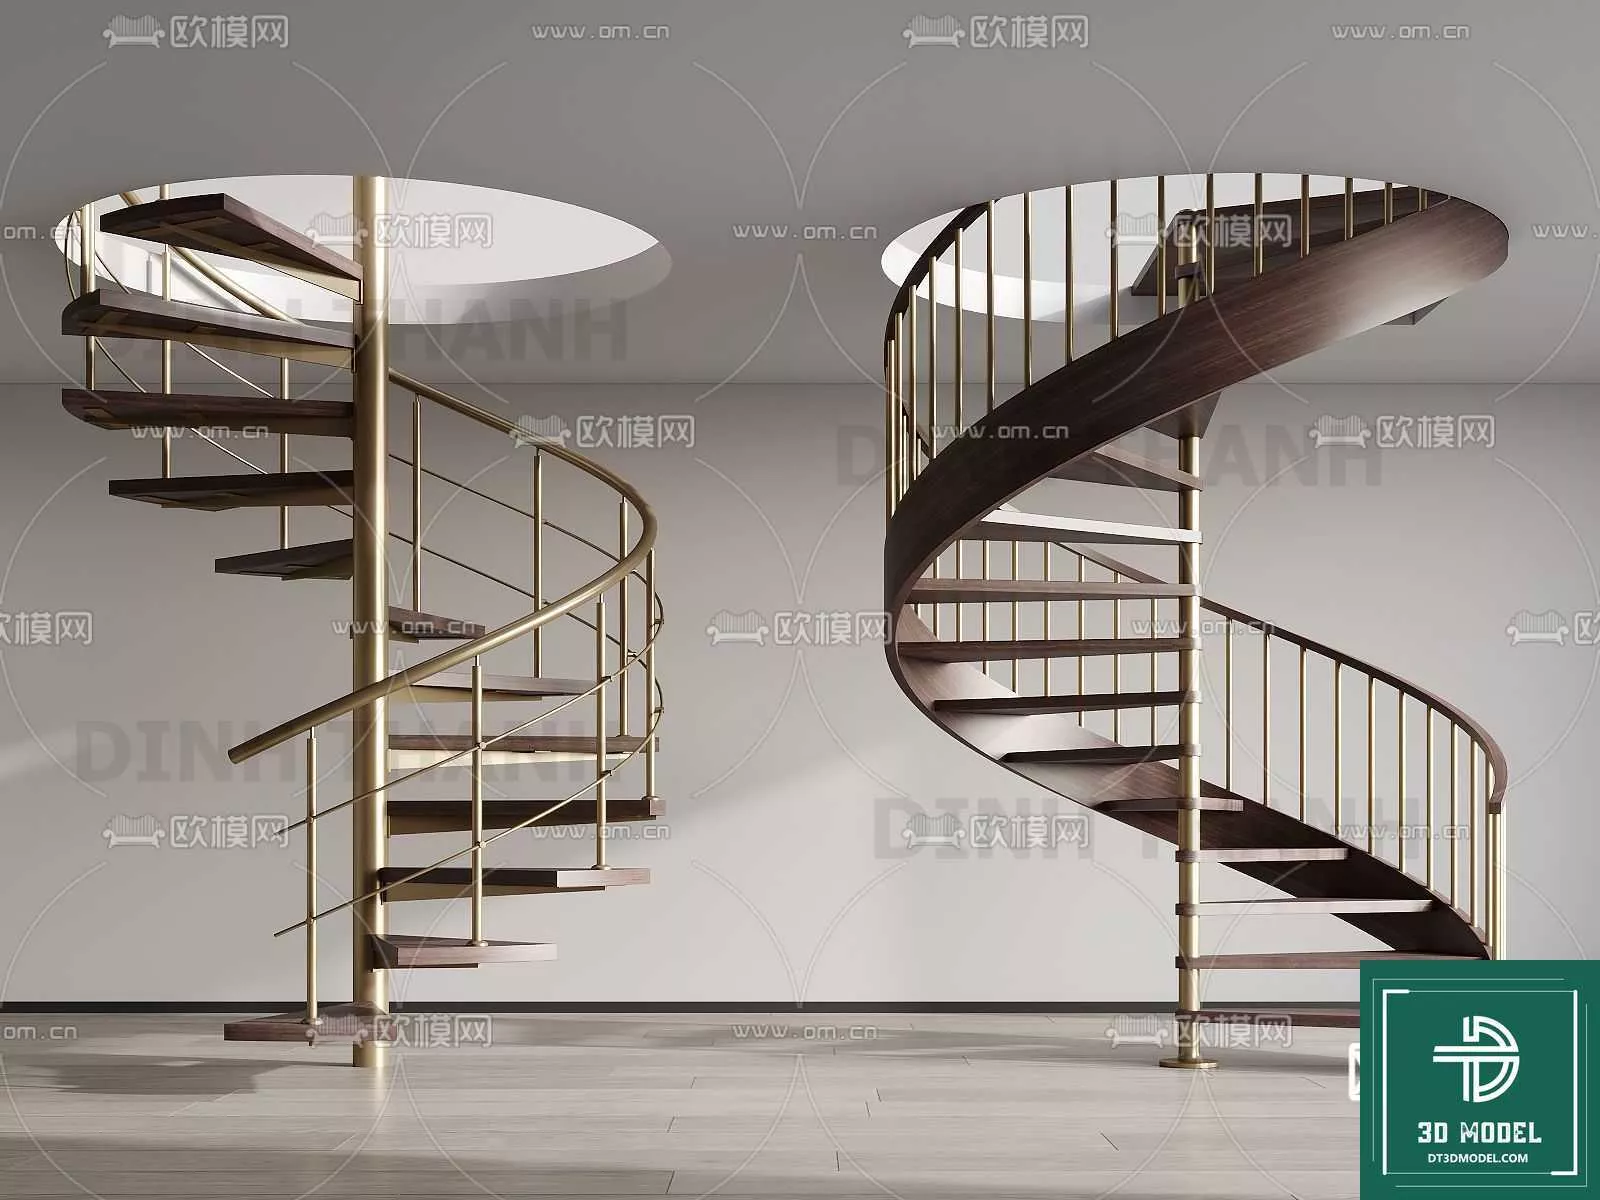 MODERN STAIR - SKETCHUP 3D MODEL - VRAY OR ENSCAPE - ID14223